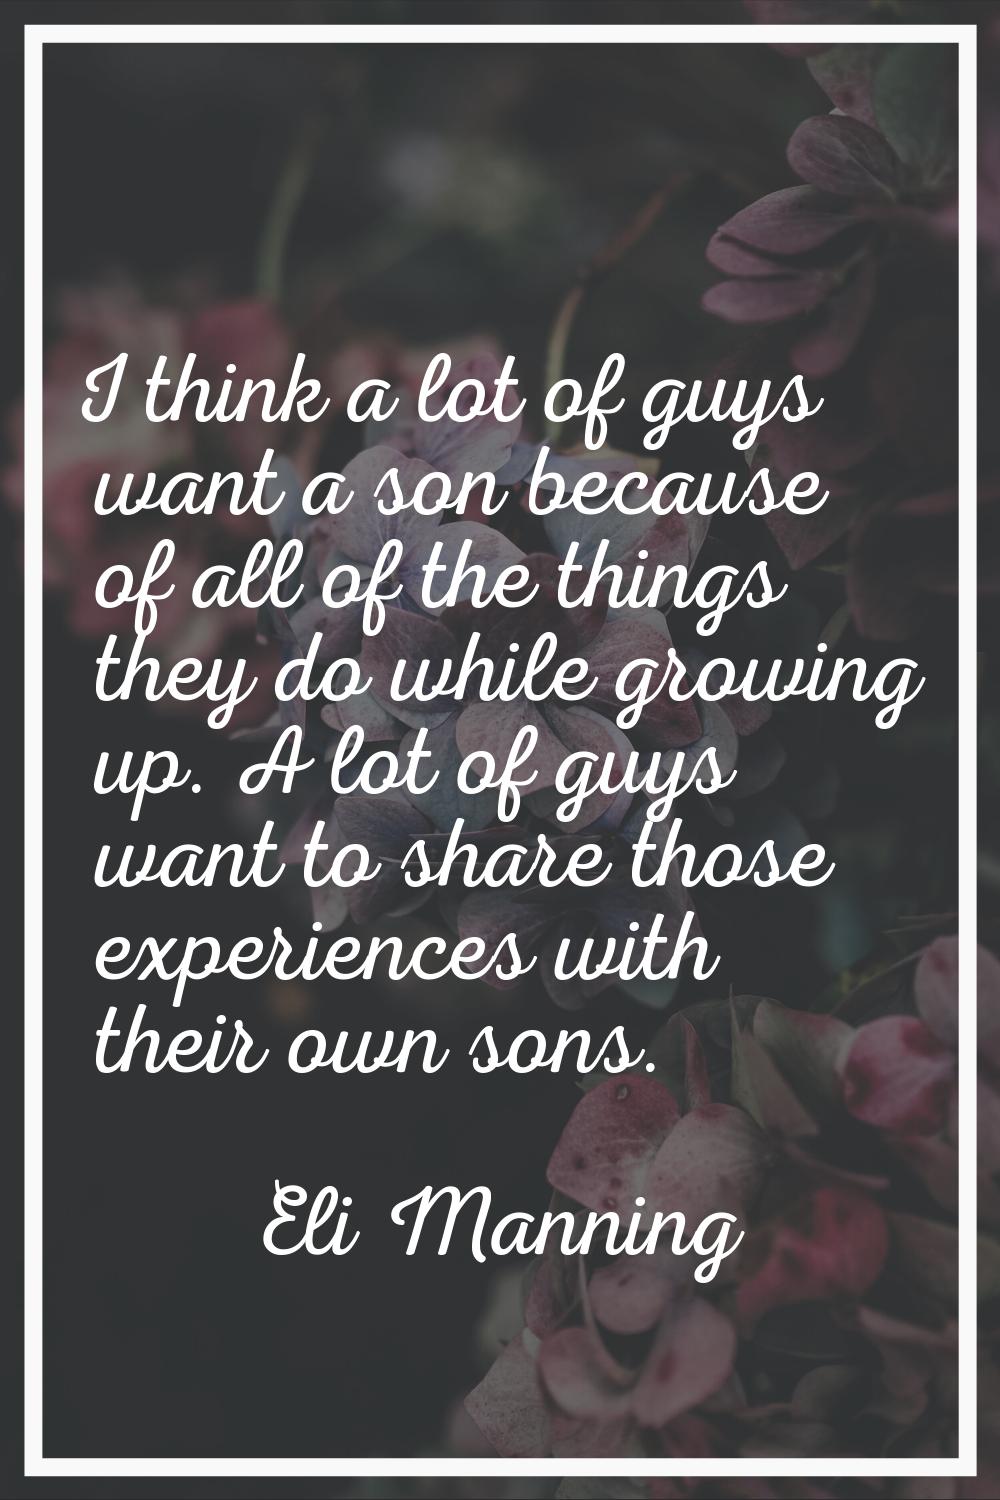 I think a lot of guys want a son because of all of the things they do while growing up. A lot of gu